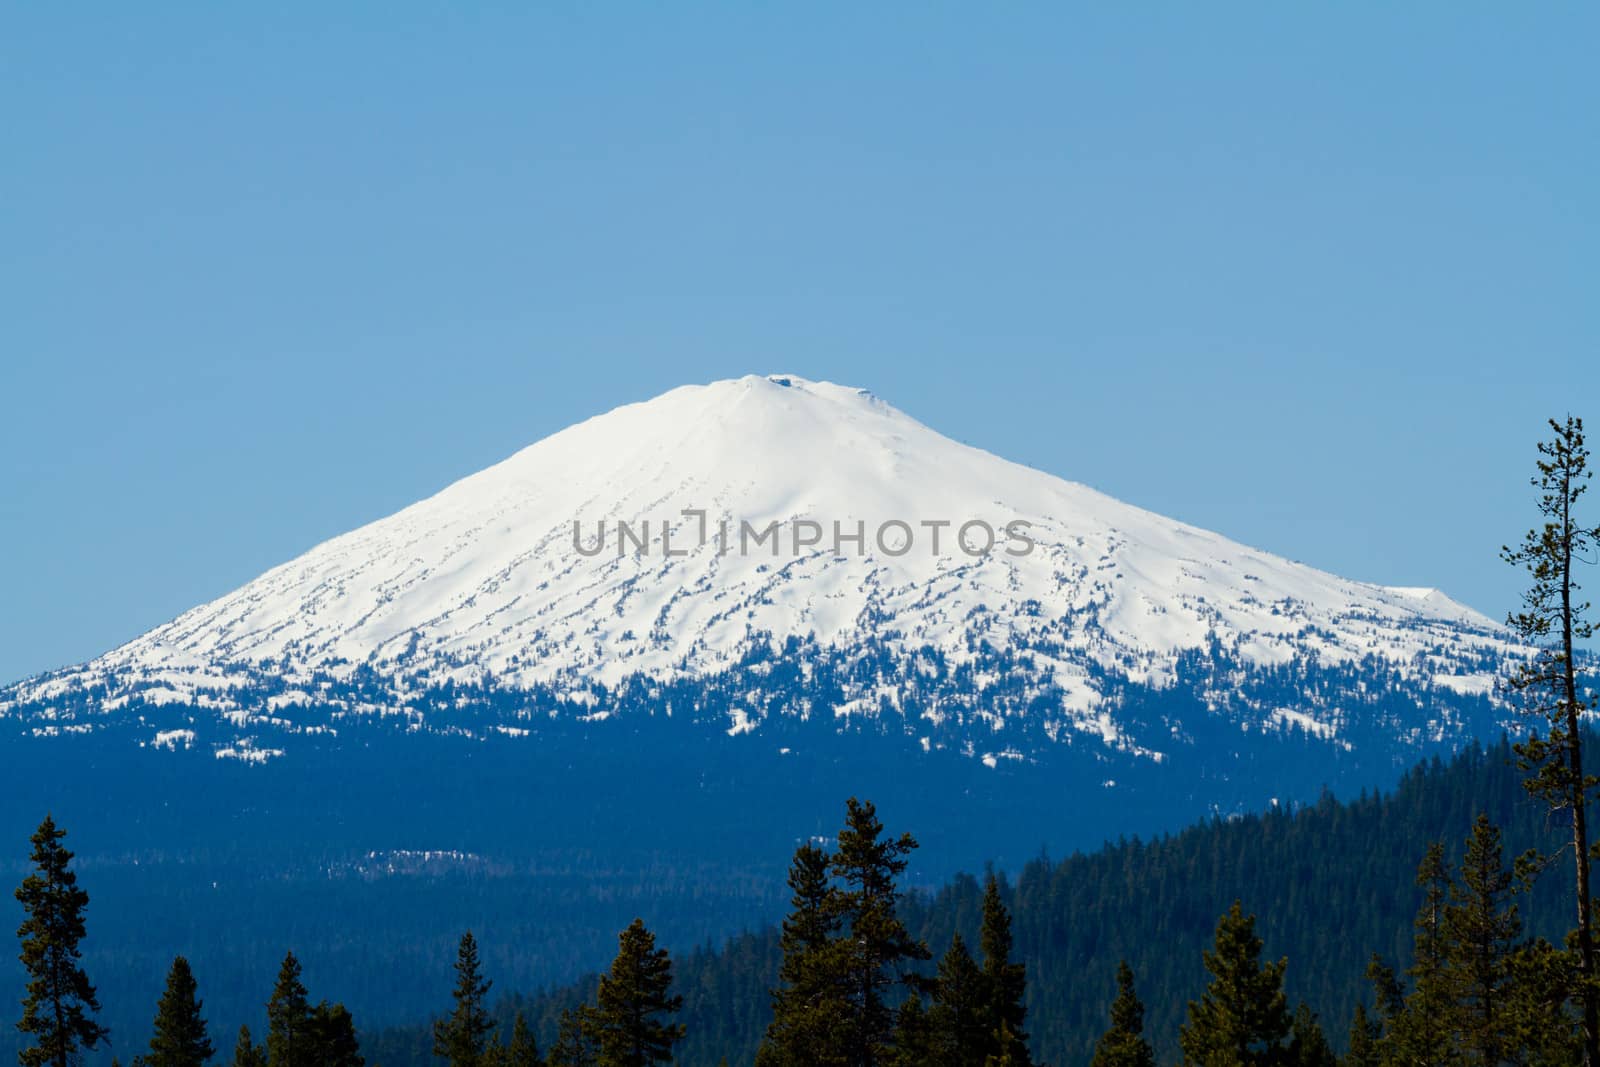 Mount Bachelor in Oregon is photographed from a distance to create this nature scenic landscape of the snow-capped mountain.